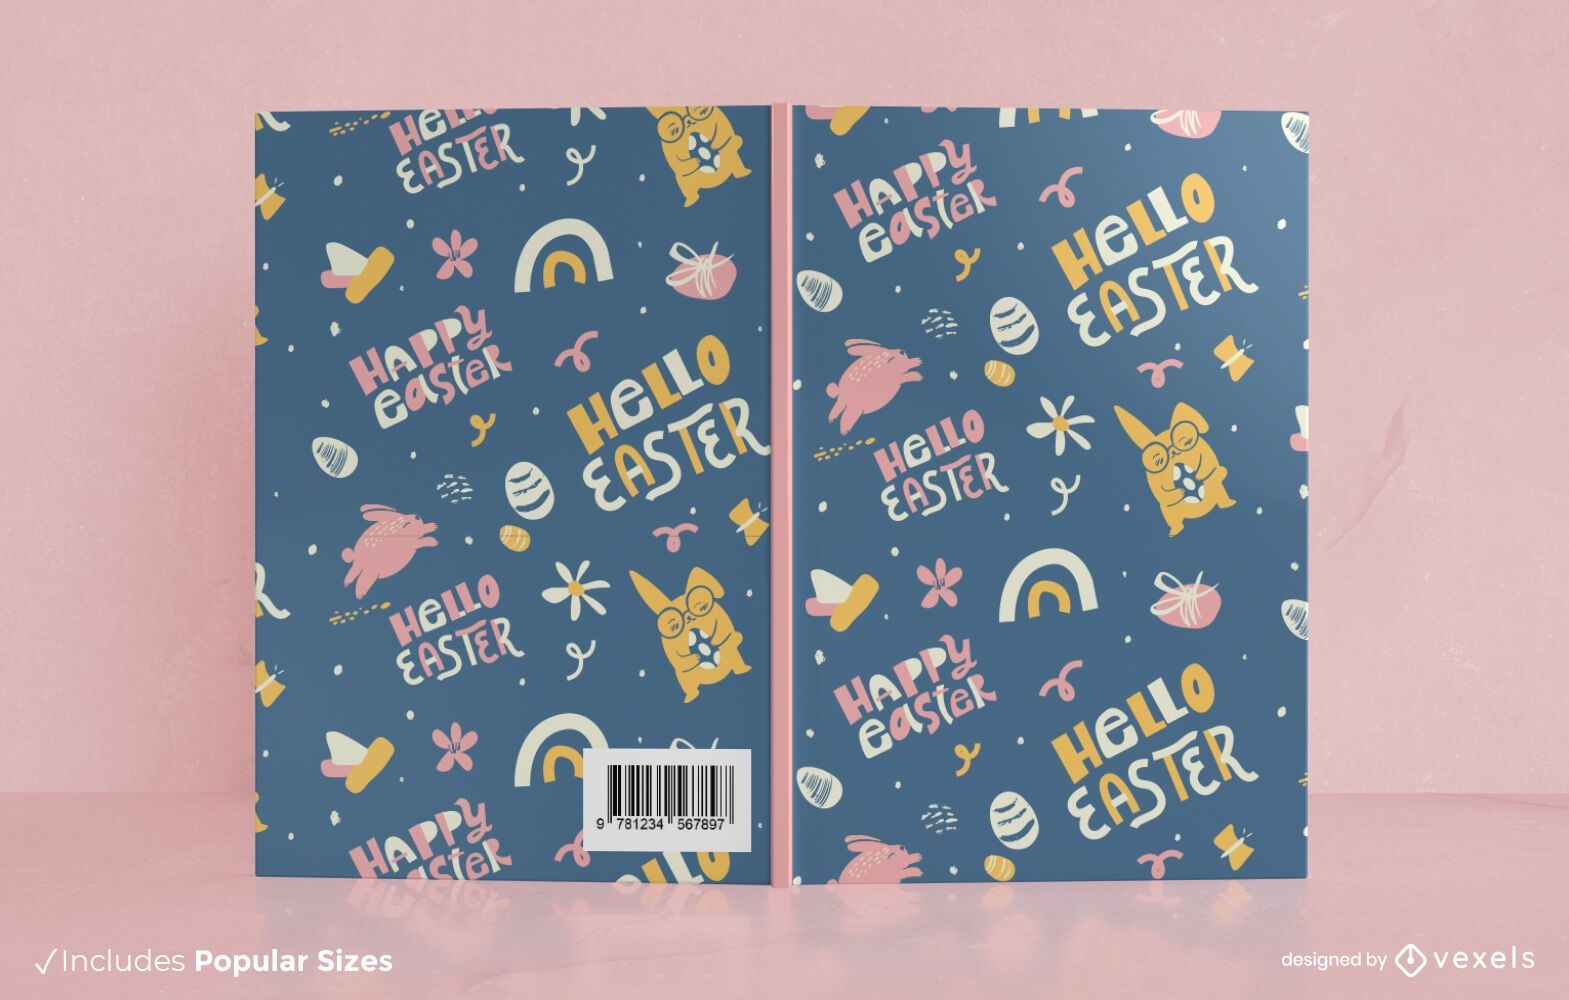 Happy easter book cover design